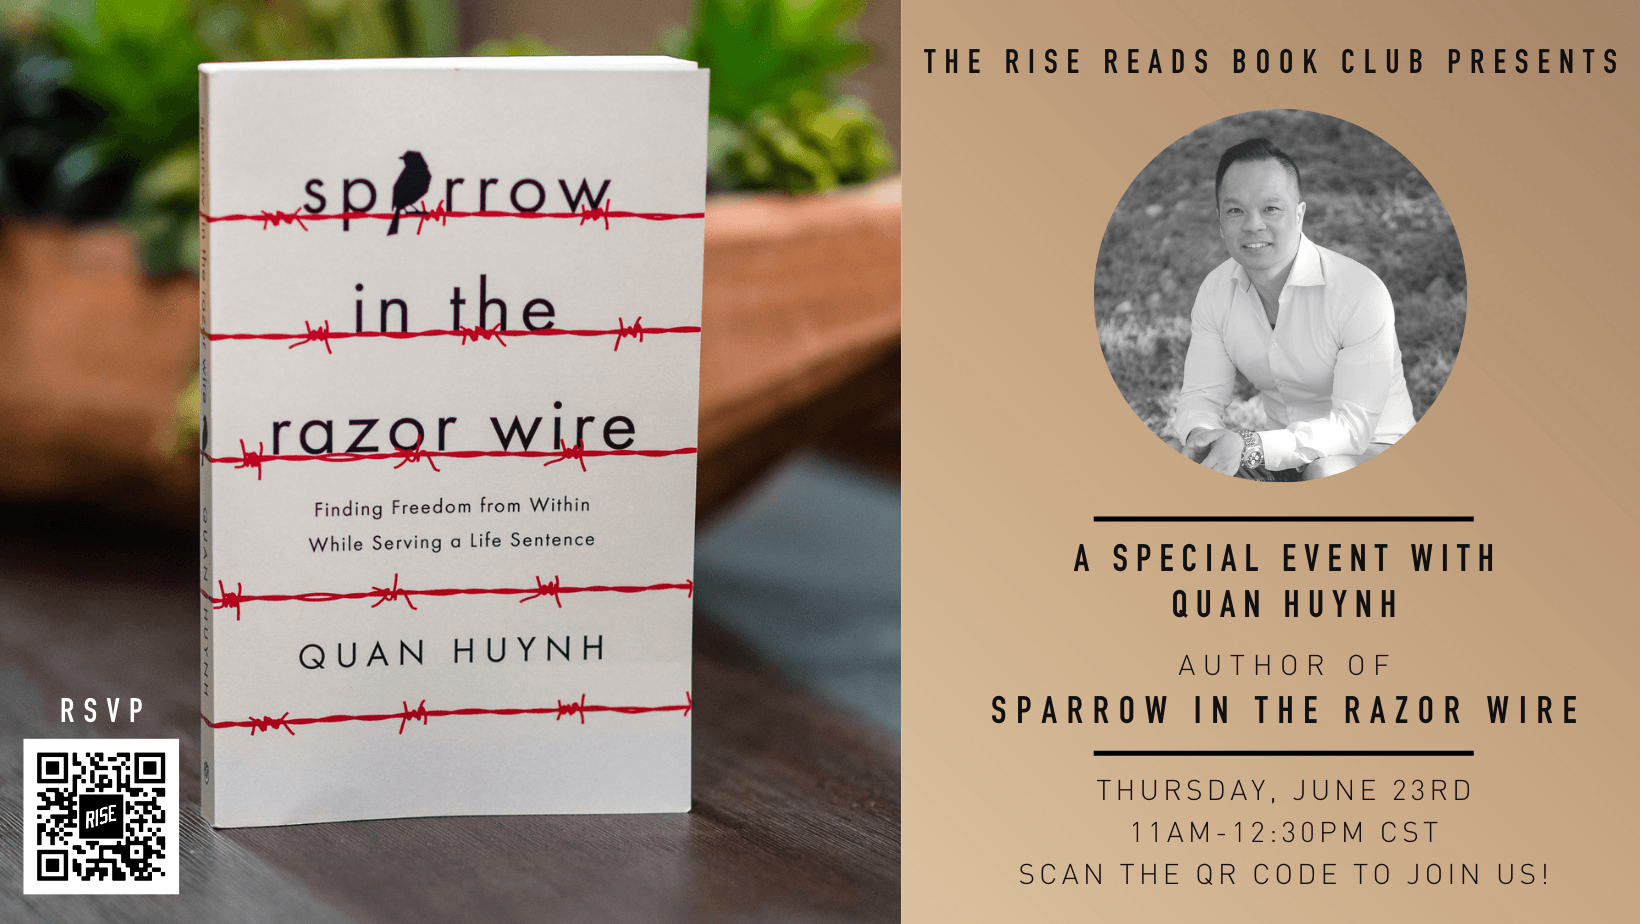 A special event with Sparrow in the Razor Wire author, Quan Huynh.